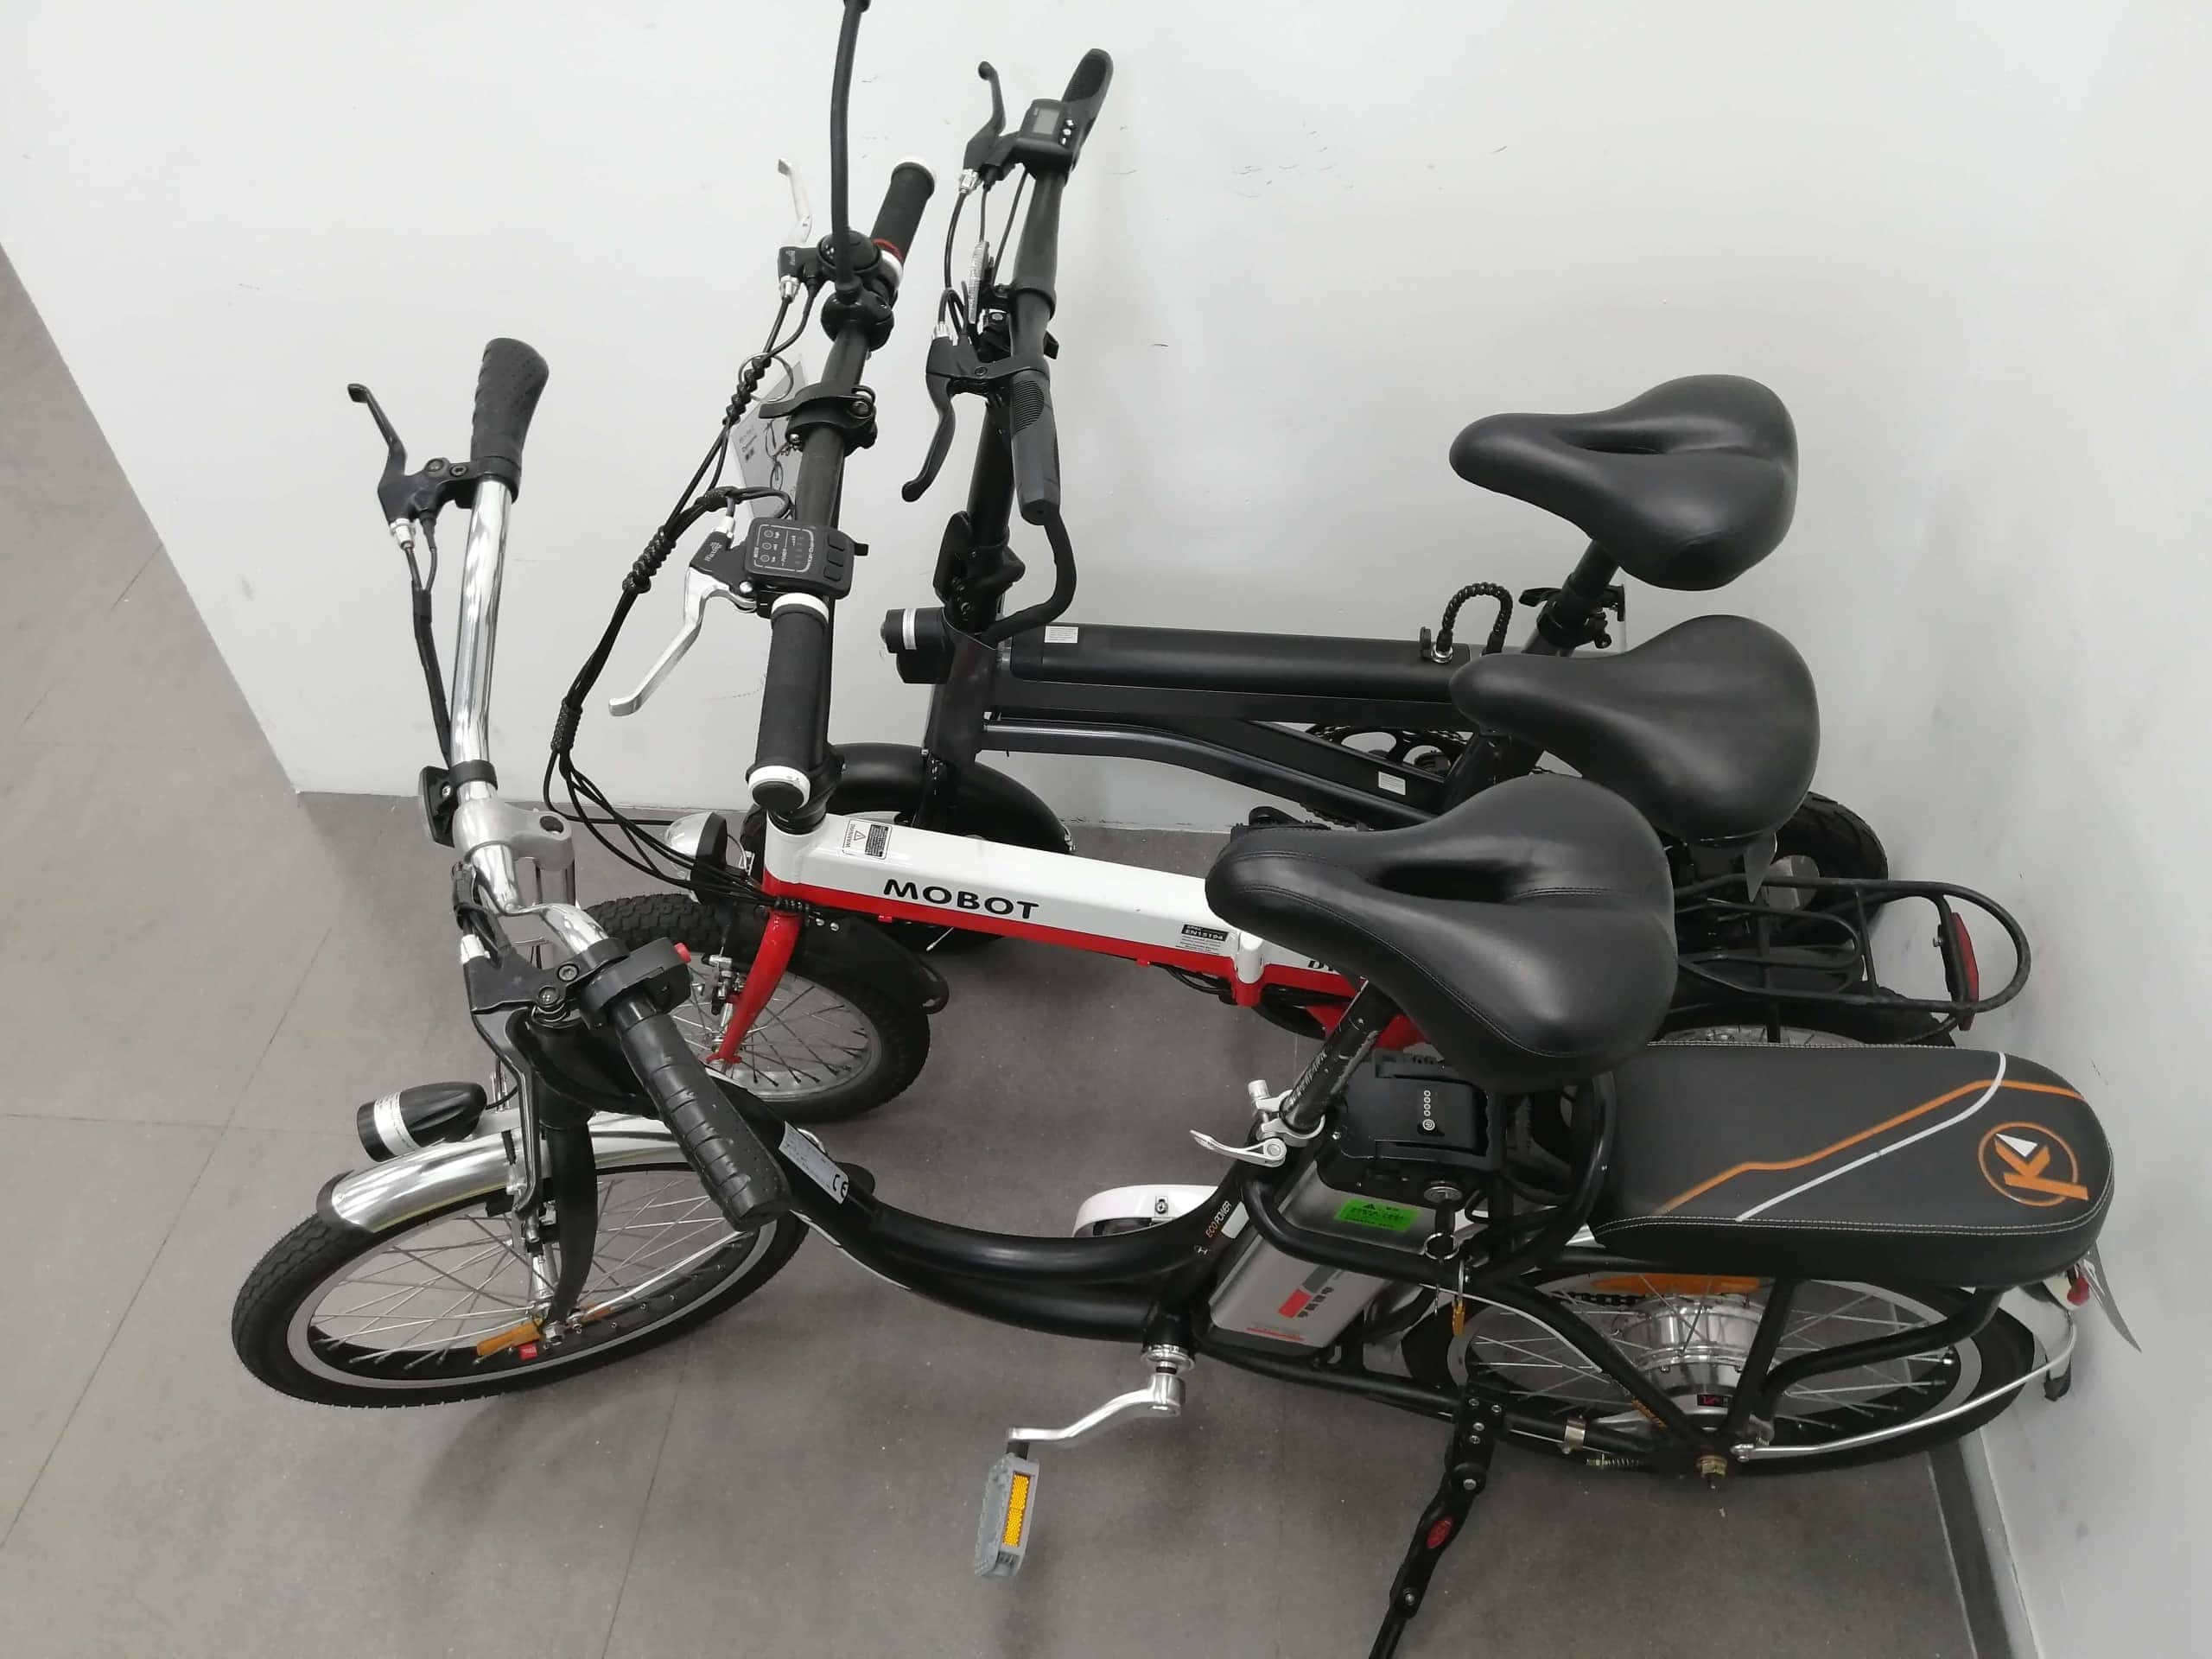 JI MOVE LTA approved ebike length comparison scaled - Review of JI-MOVE LC, the most compact LTA approved ebike?